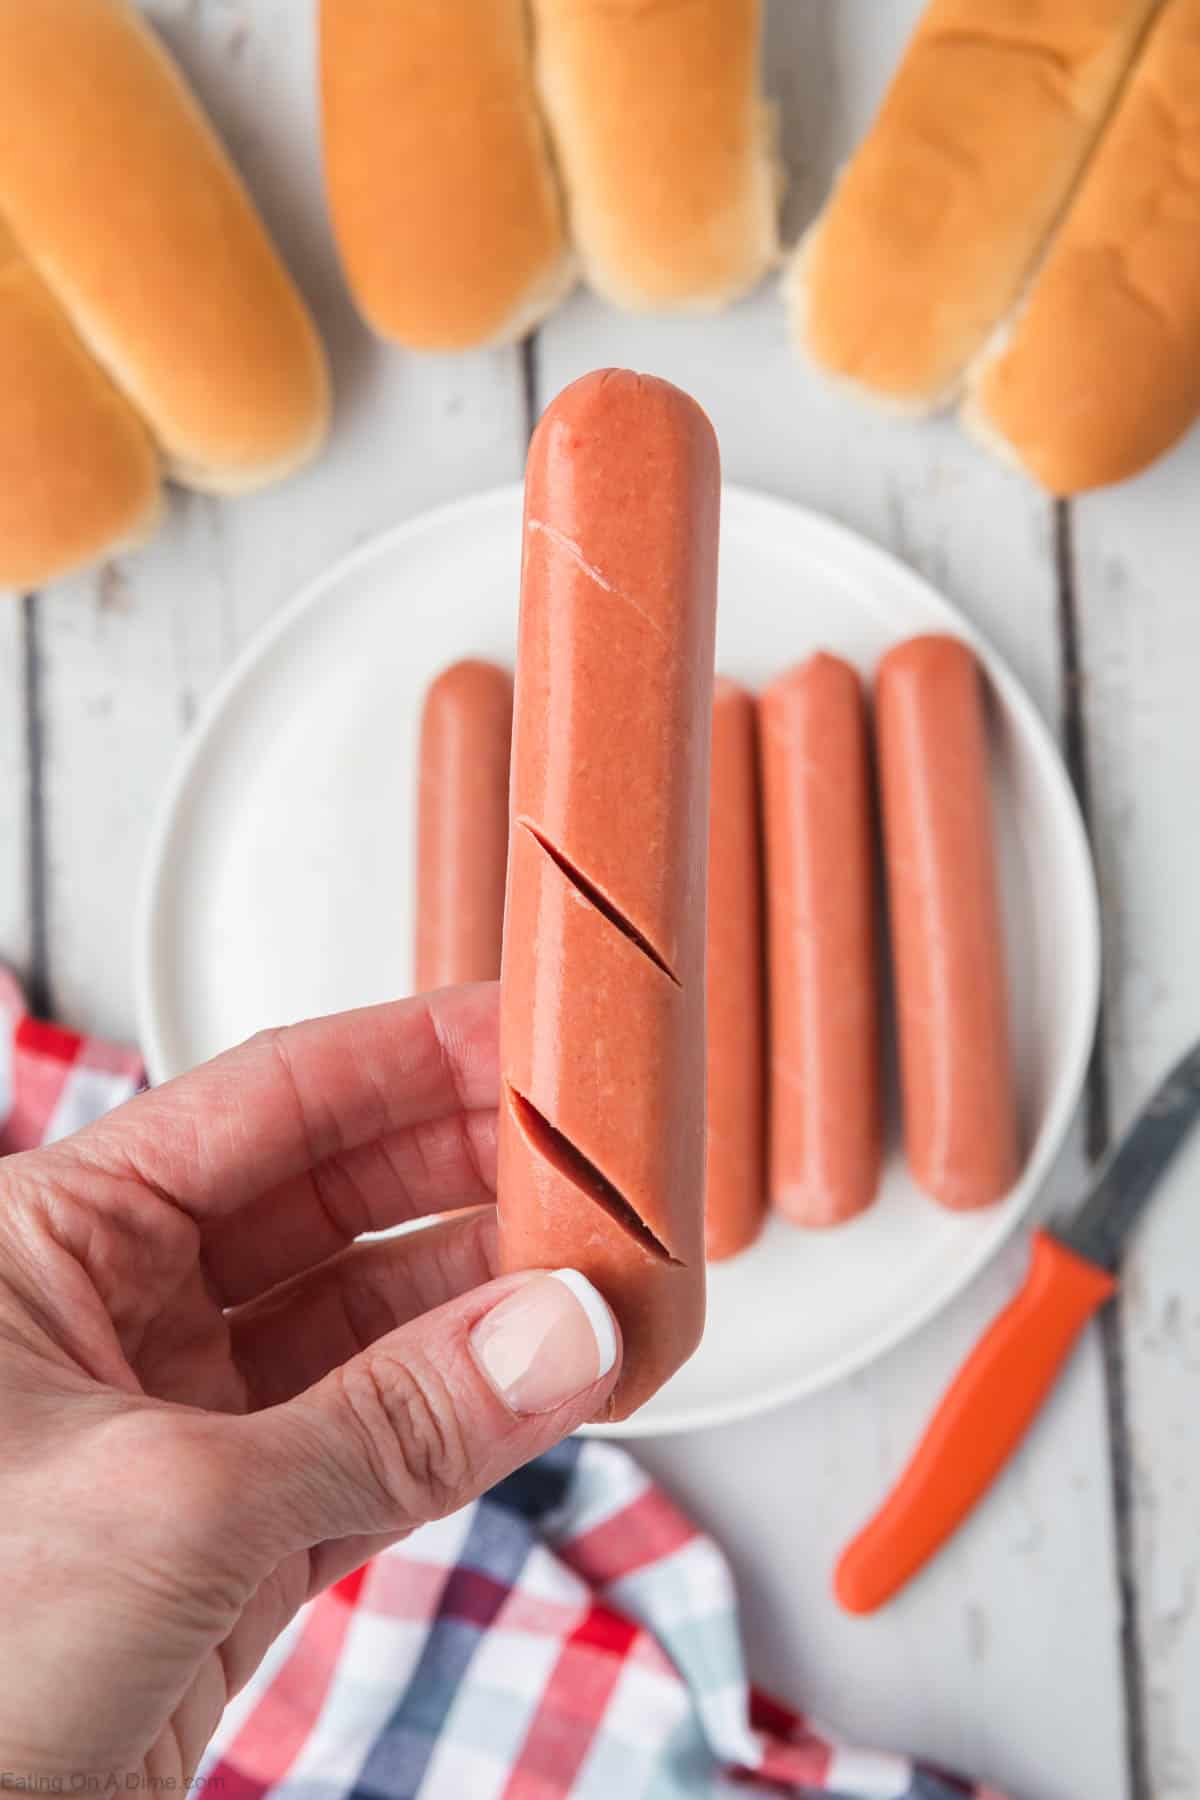 Hot dogs cut with slits with a plate of hot dogs and buns in the back ground